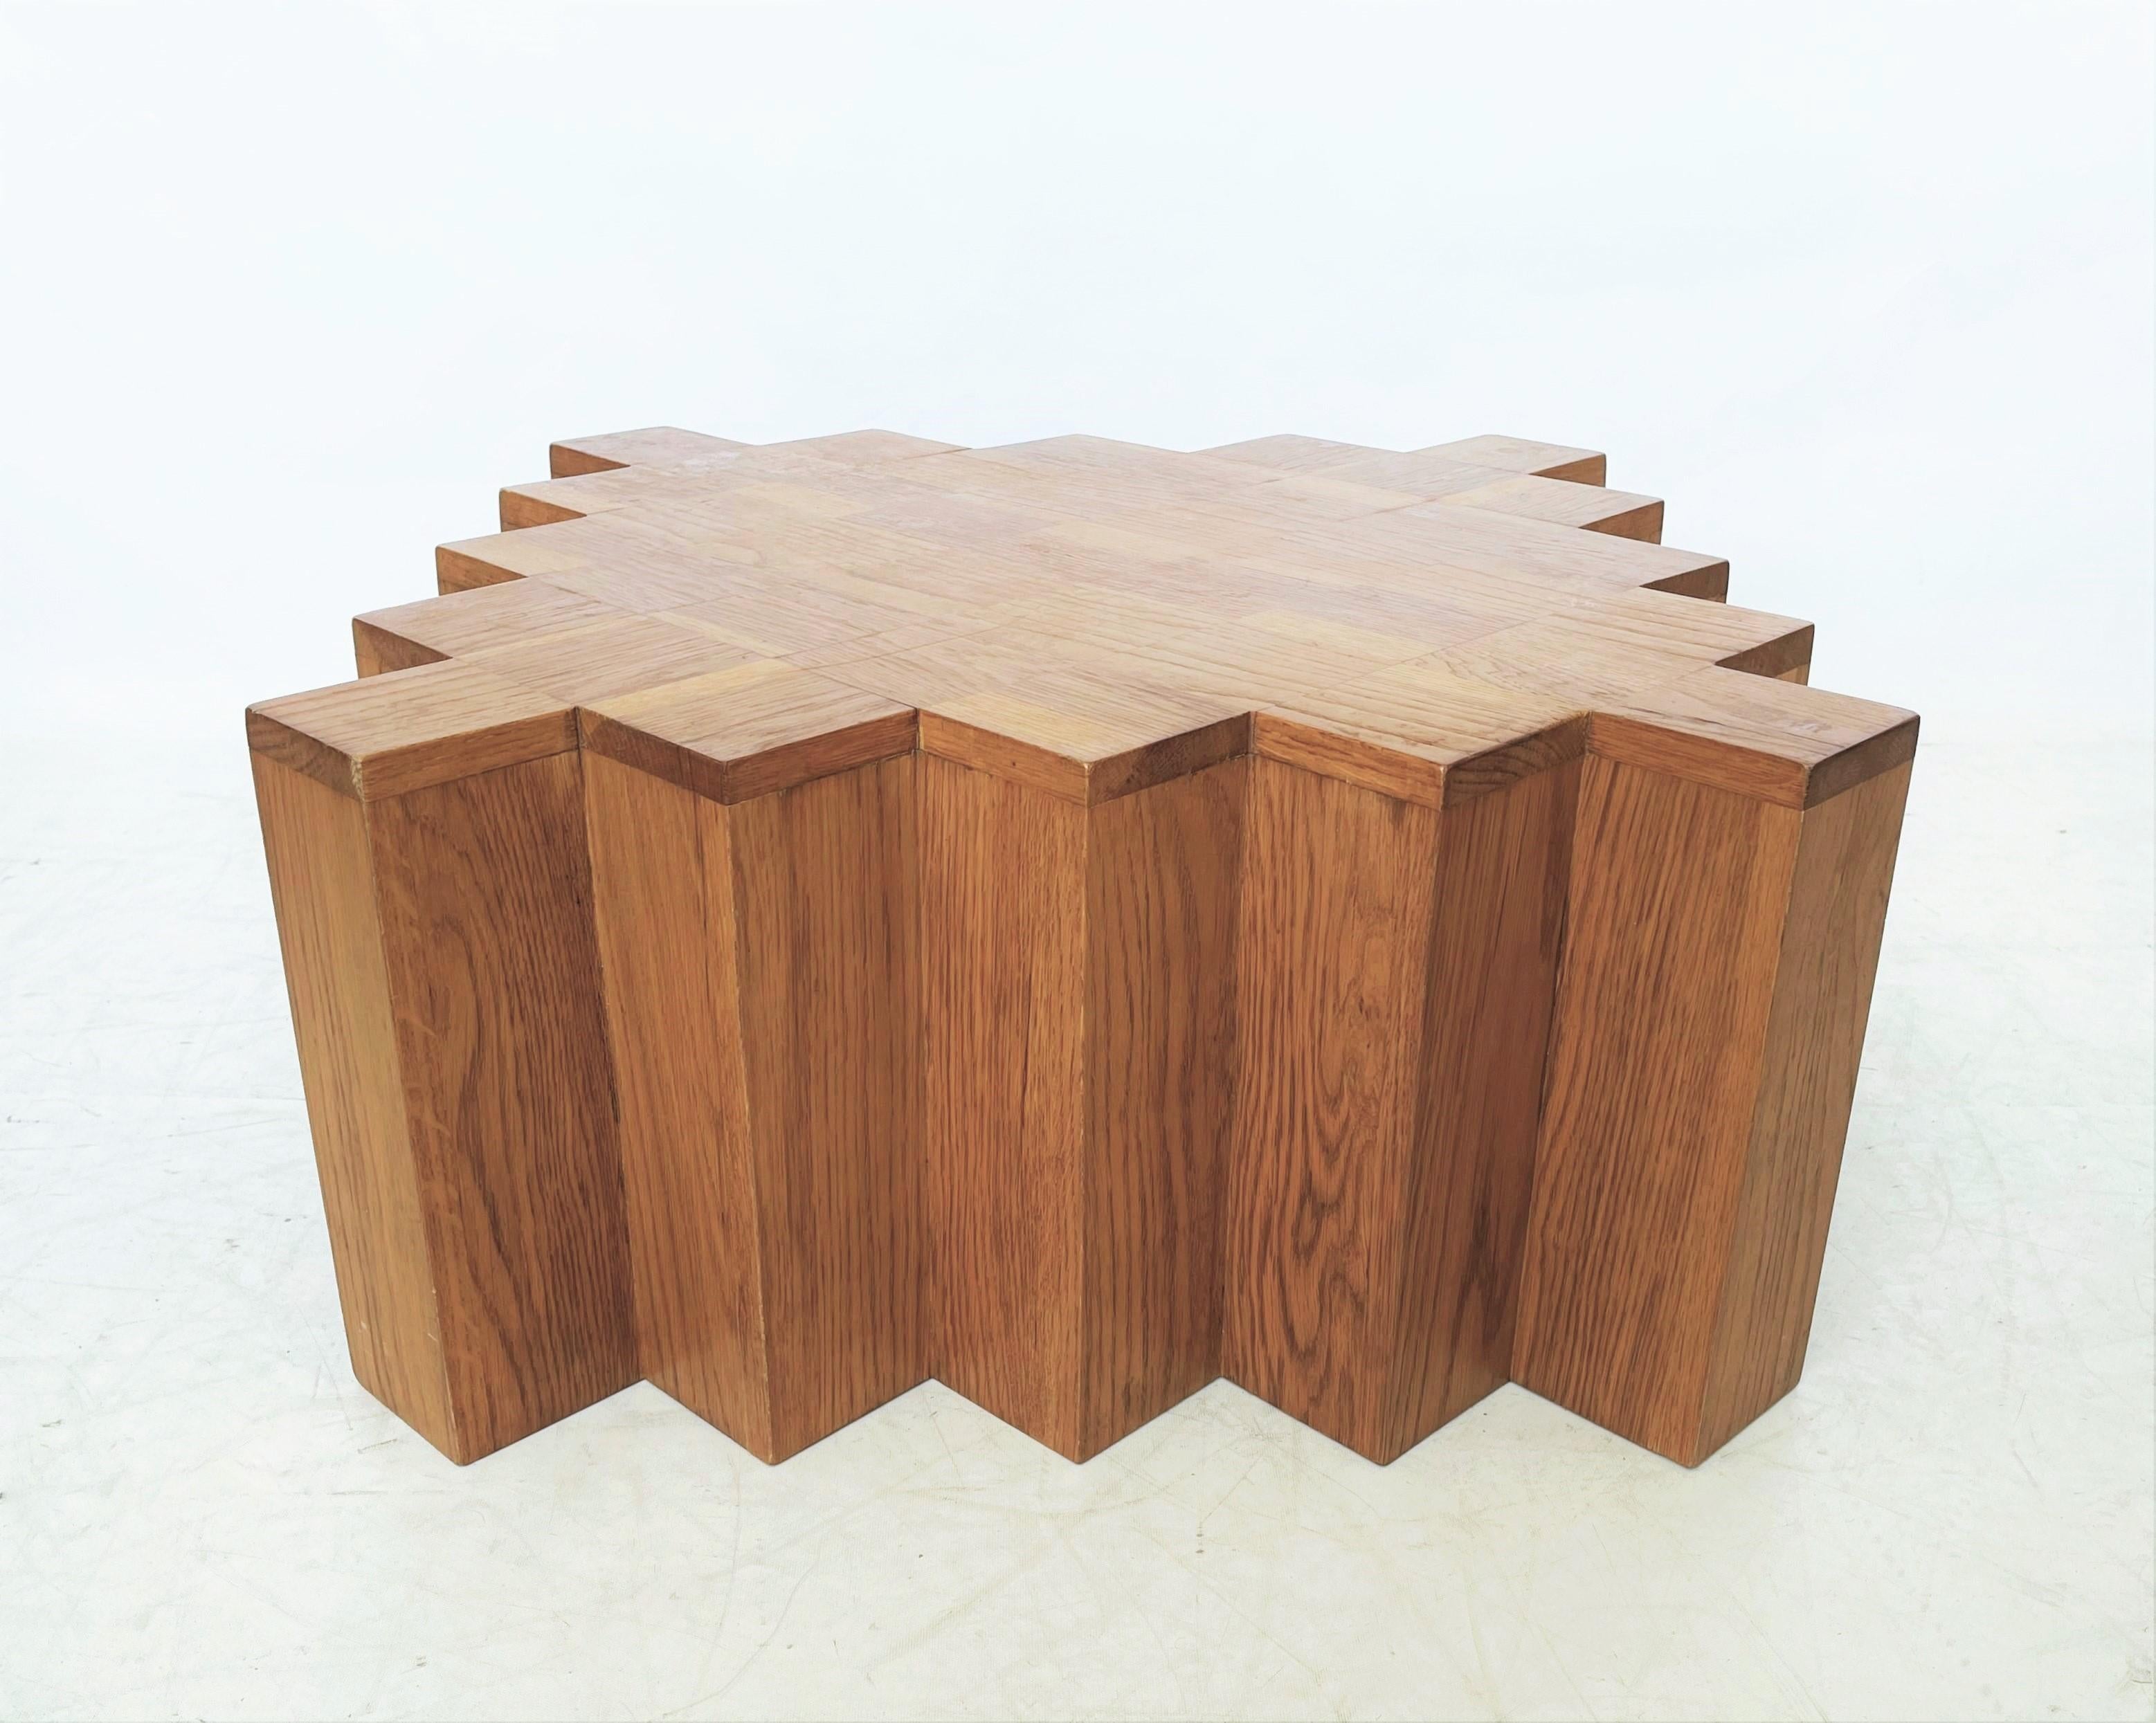 20th Century Mid-Century Modern Art Deco Style Skyscraper Coffee or Cocktail Table For Sale